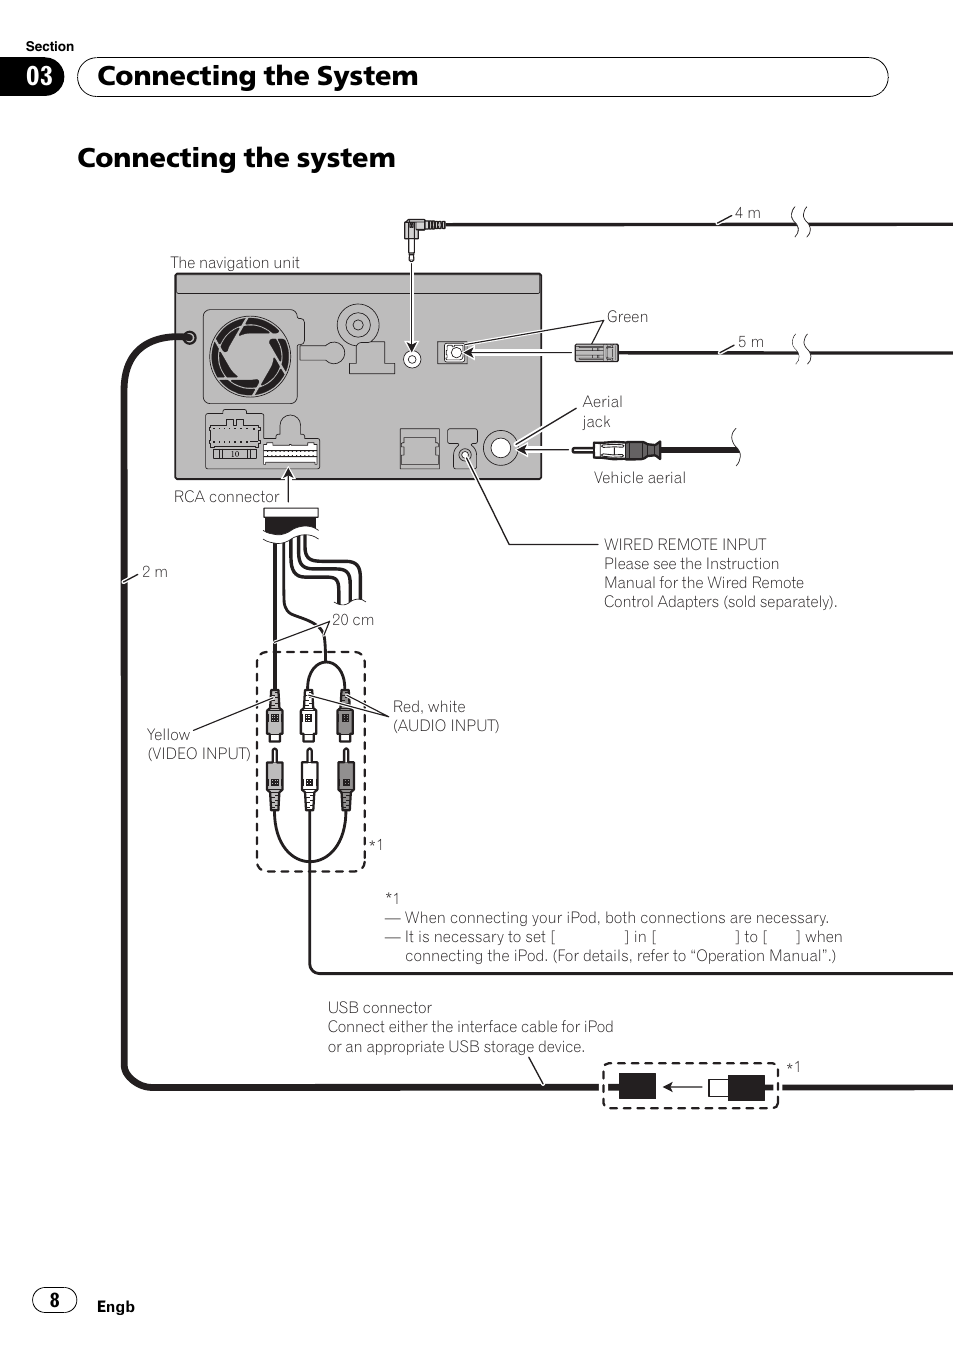 Connecting the system | Pioneer AVIC-F710BT User Manual | Page 8 / 170